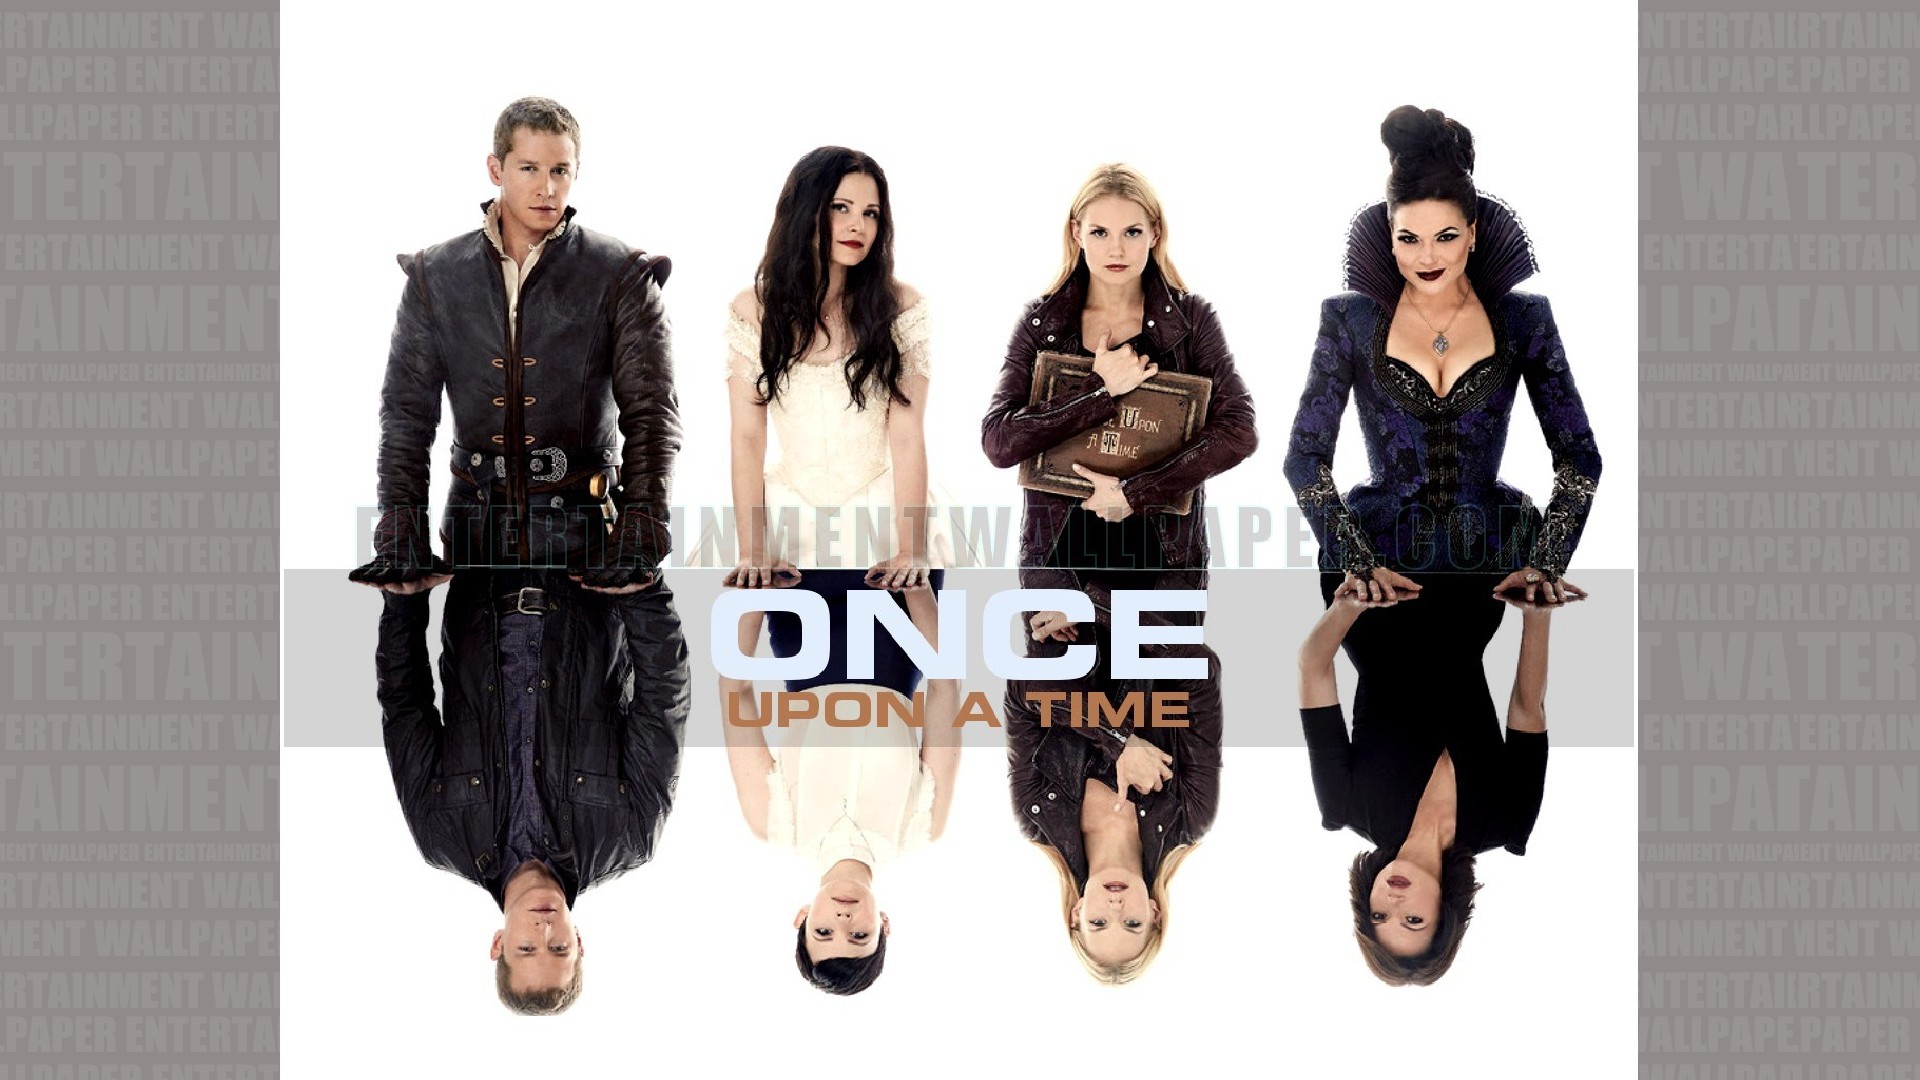 Once Upon a Time Wallpaper – Original size, download now